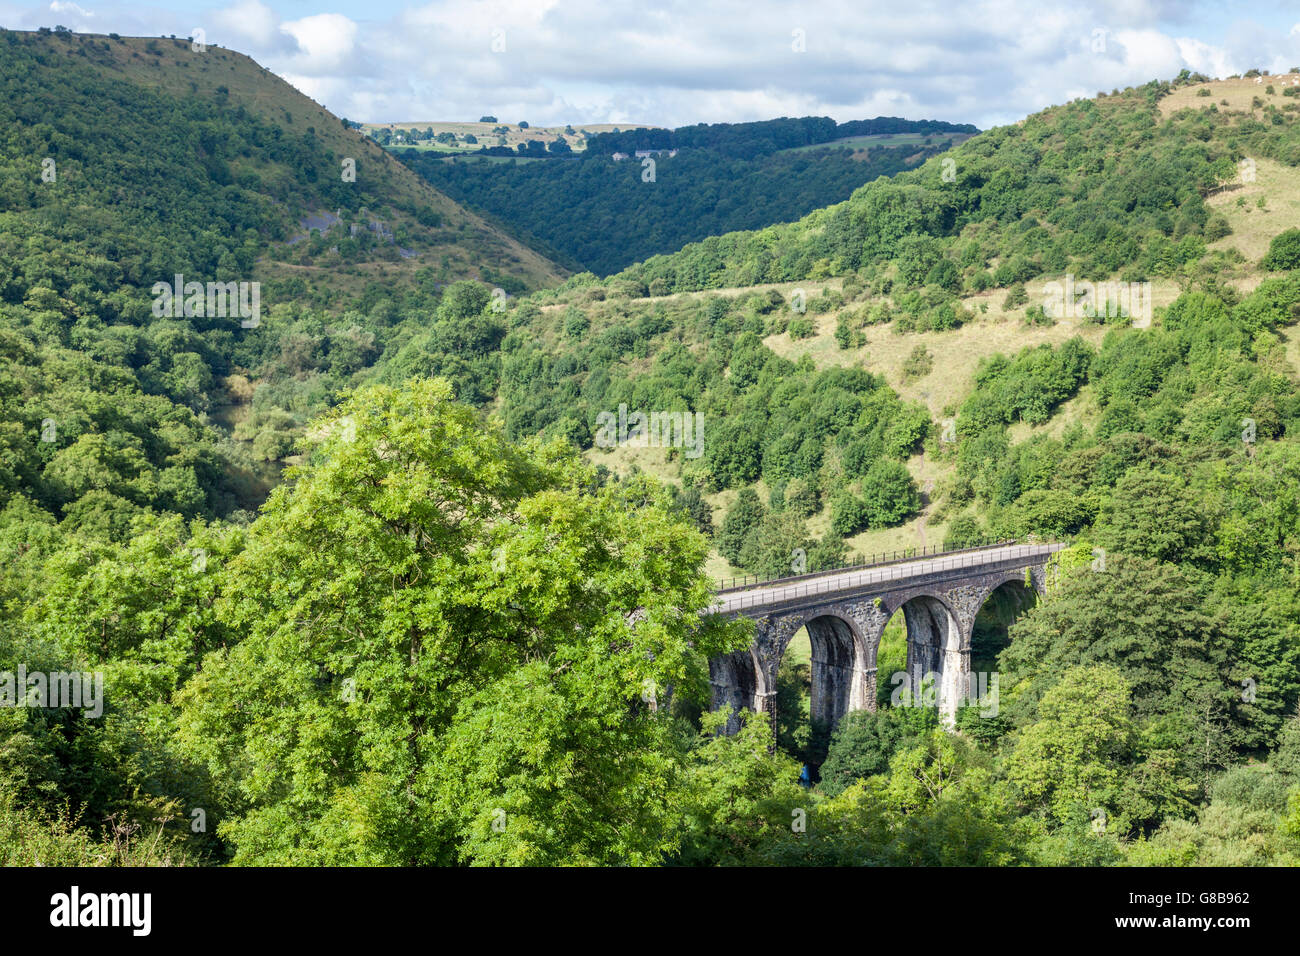 The Headstone Viaduct over Monsal Dale seen from Monsal Head, Derbyshire Dales, White Peak, Peak District National Park, England, UK Stock Photo